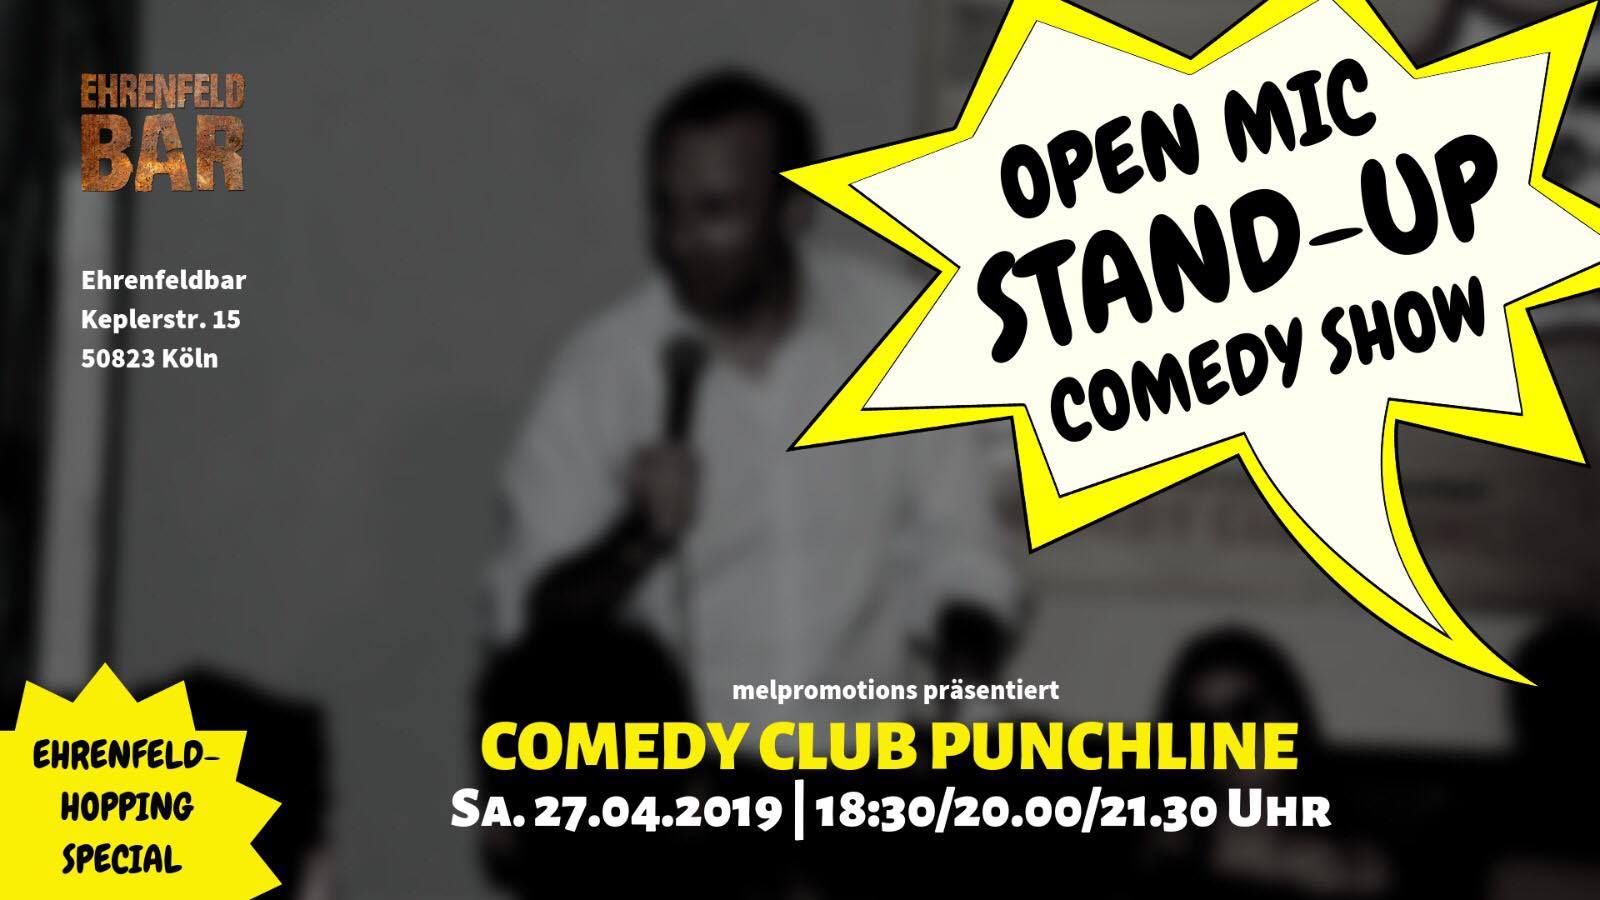 Open Mic Comedy Show Punchline